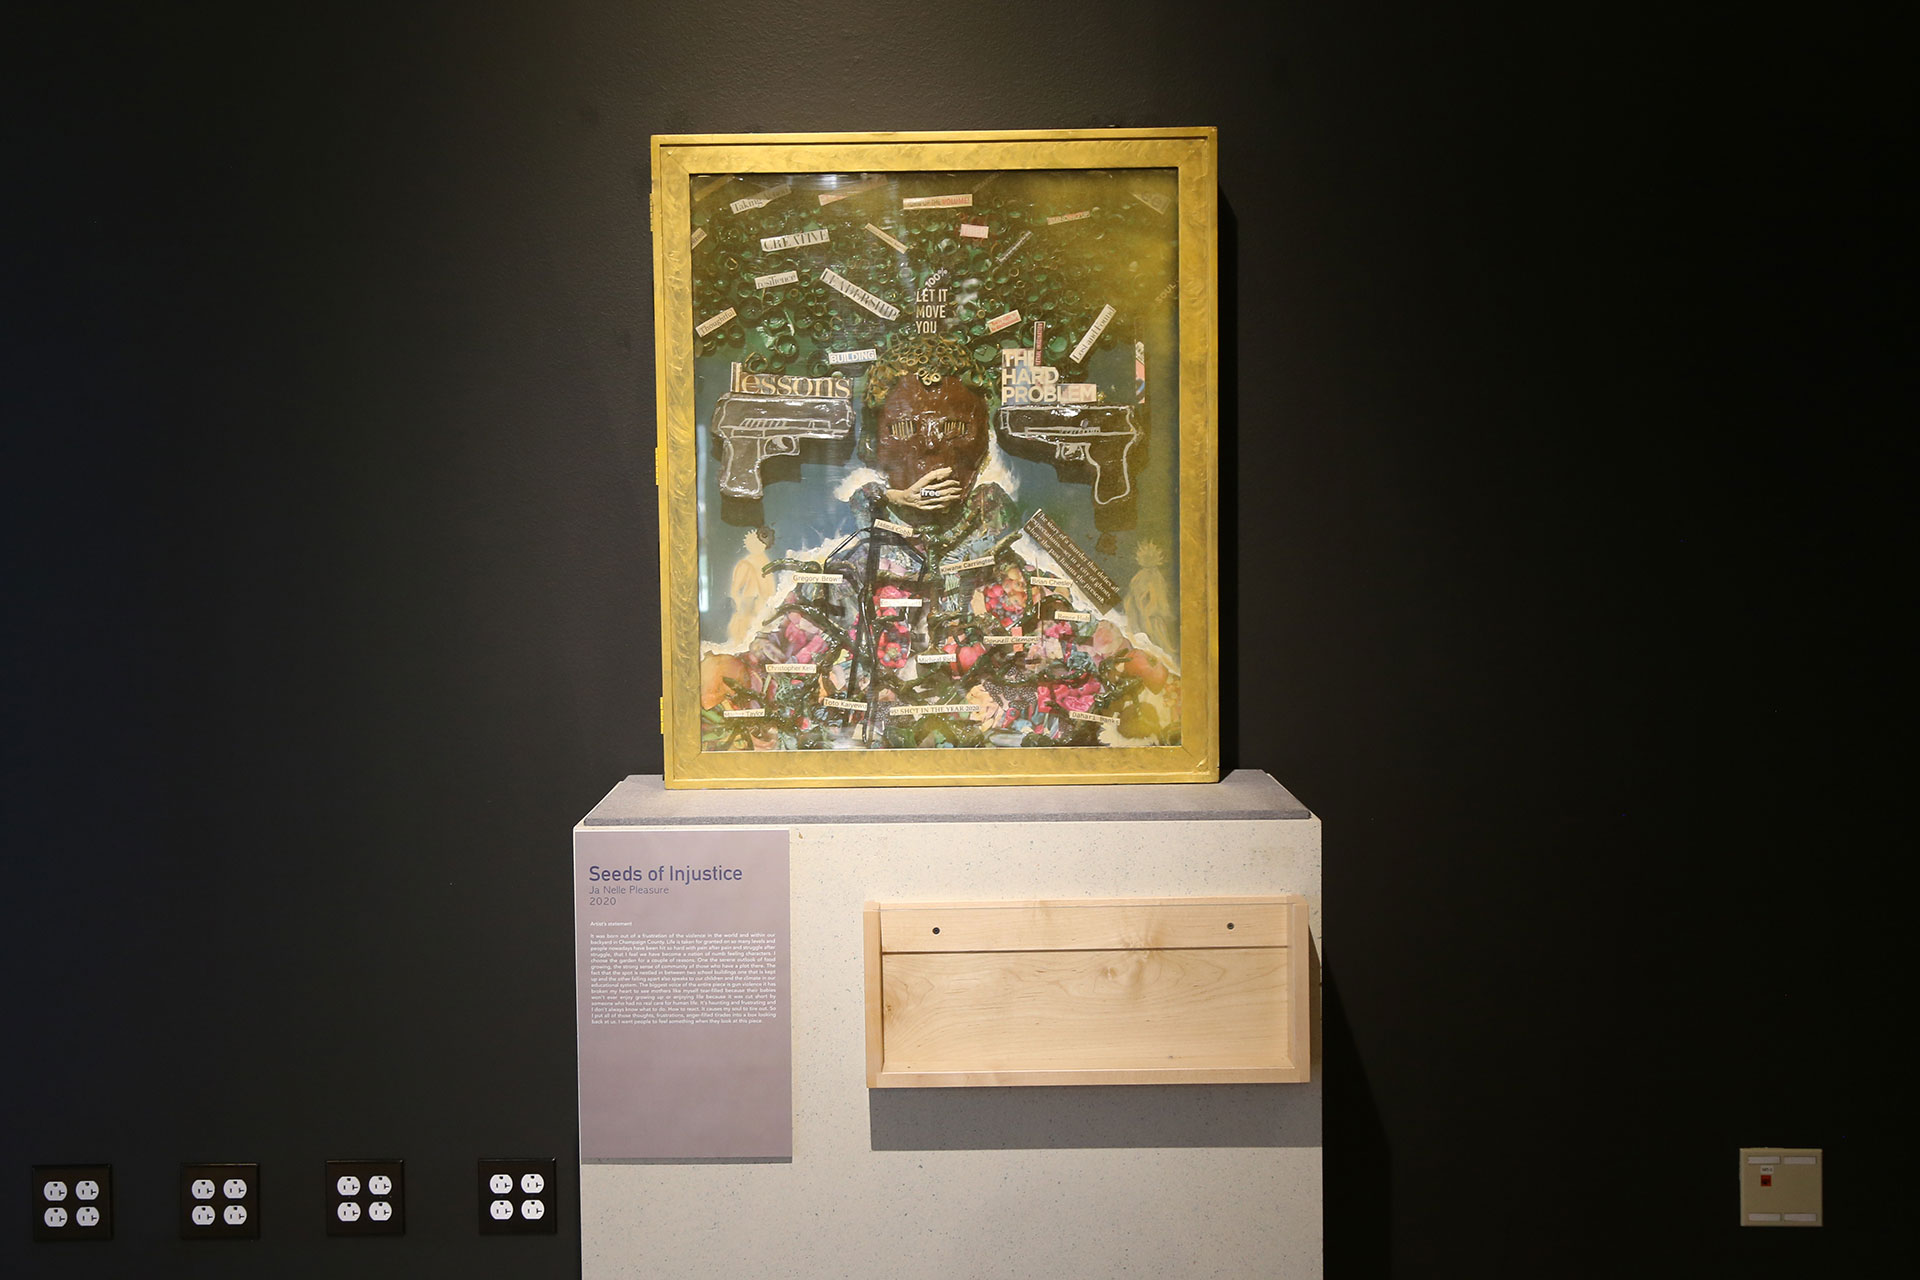 A further away look of the Seeds of Injustice with artwork placed in the middle of a white stand, the artist's statement attached to the left side and a wodden box placed on the right side